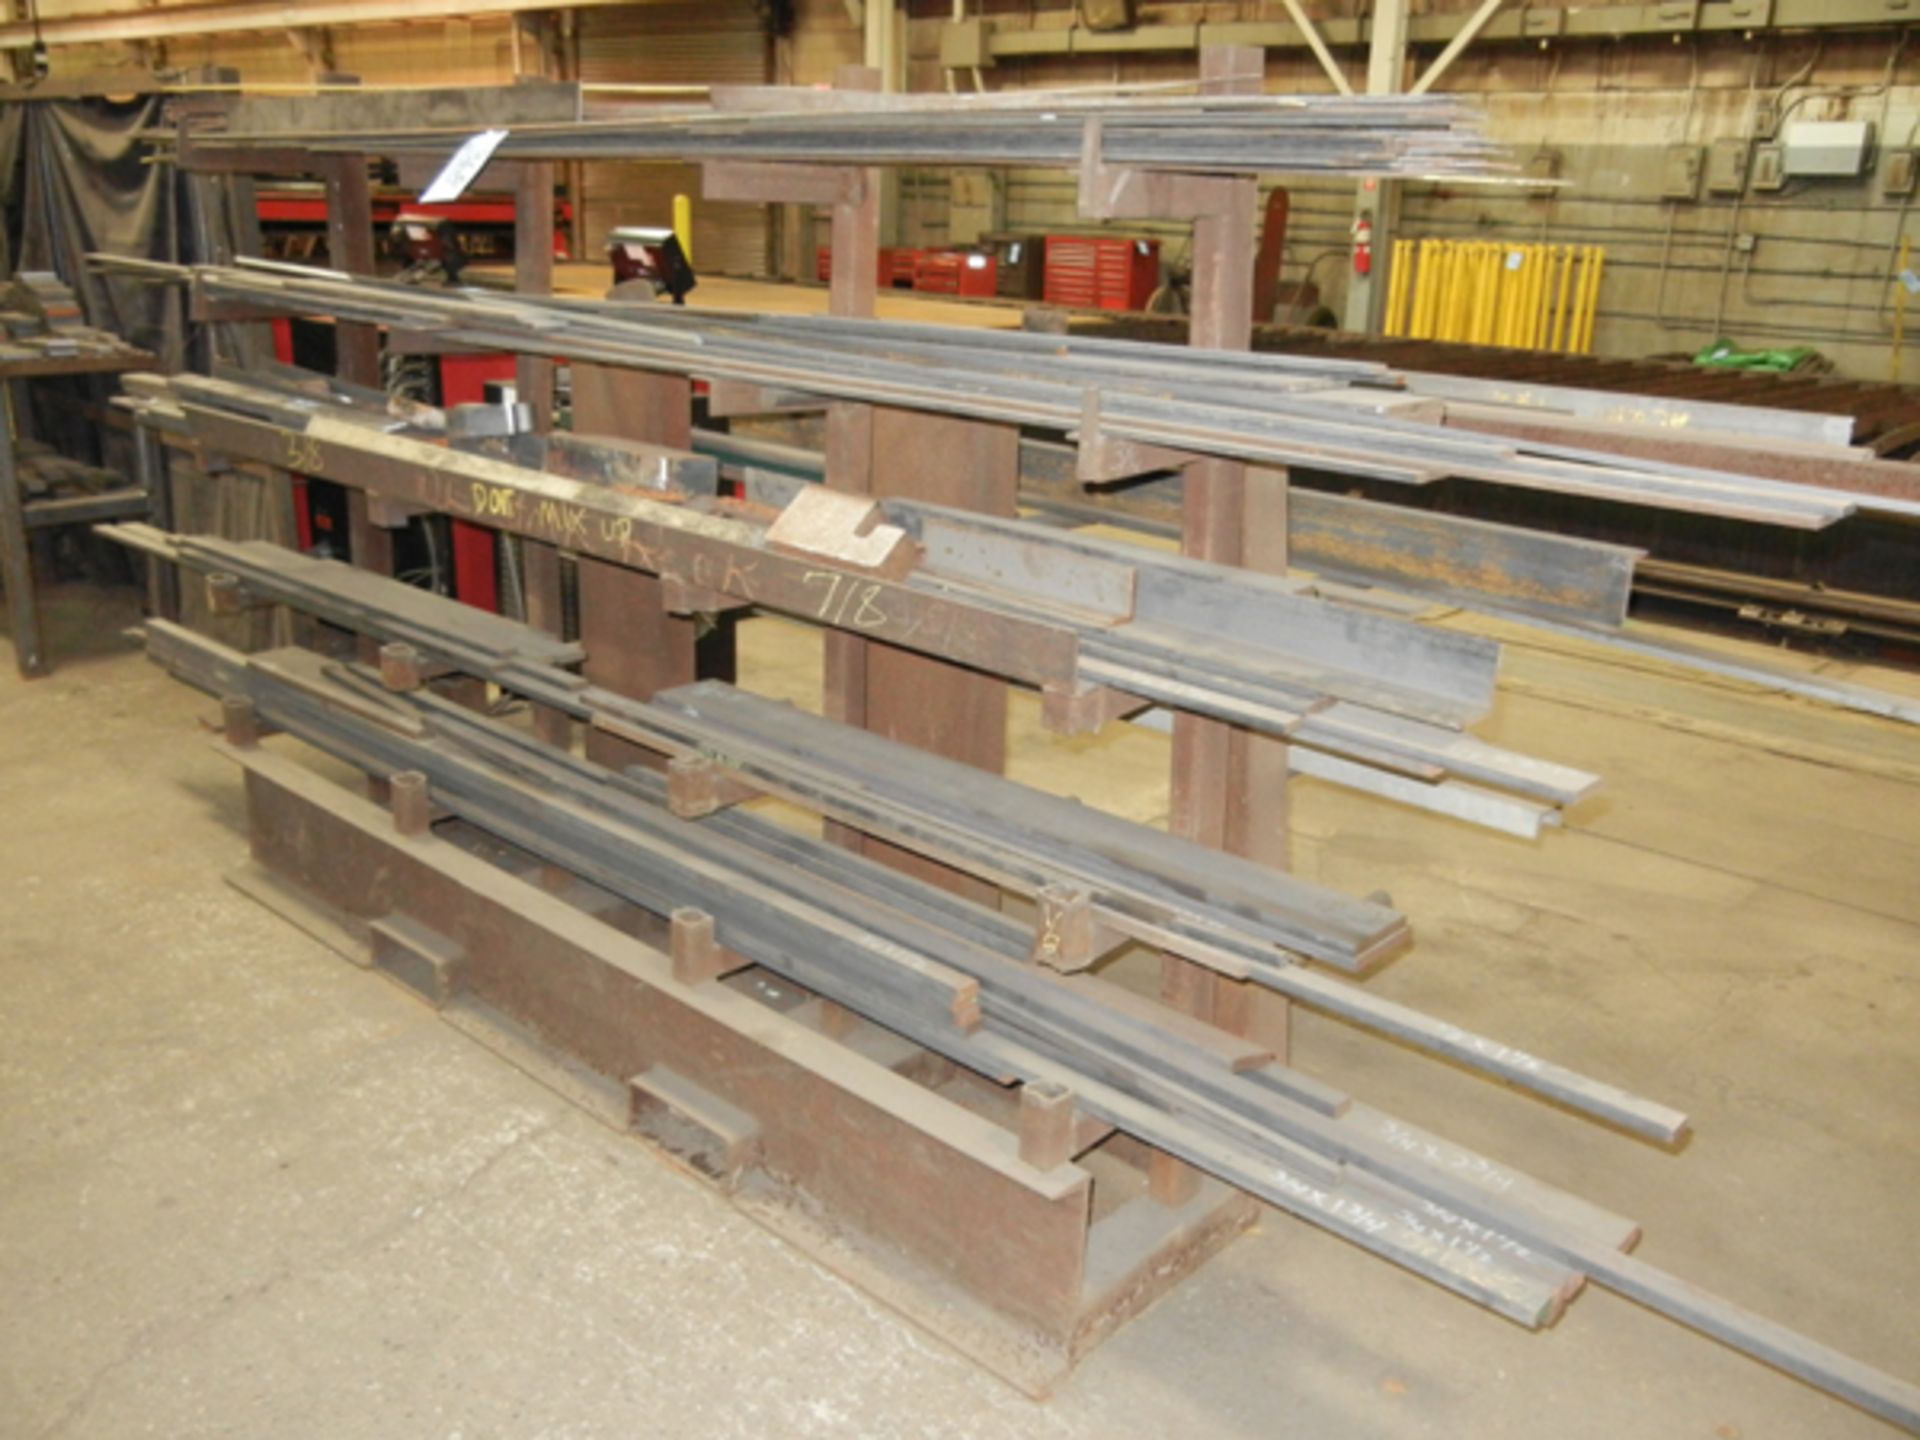 Lot-Steel Stock Consisting of: Flat Bar Stock; Angle Iron and C-Channel; Rack included - Image 3 of 4